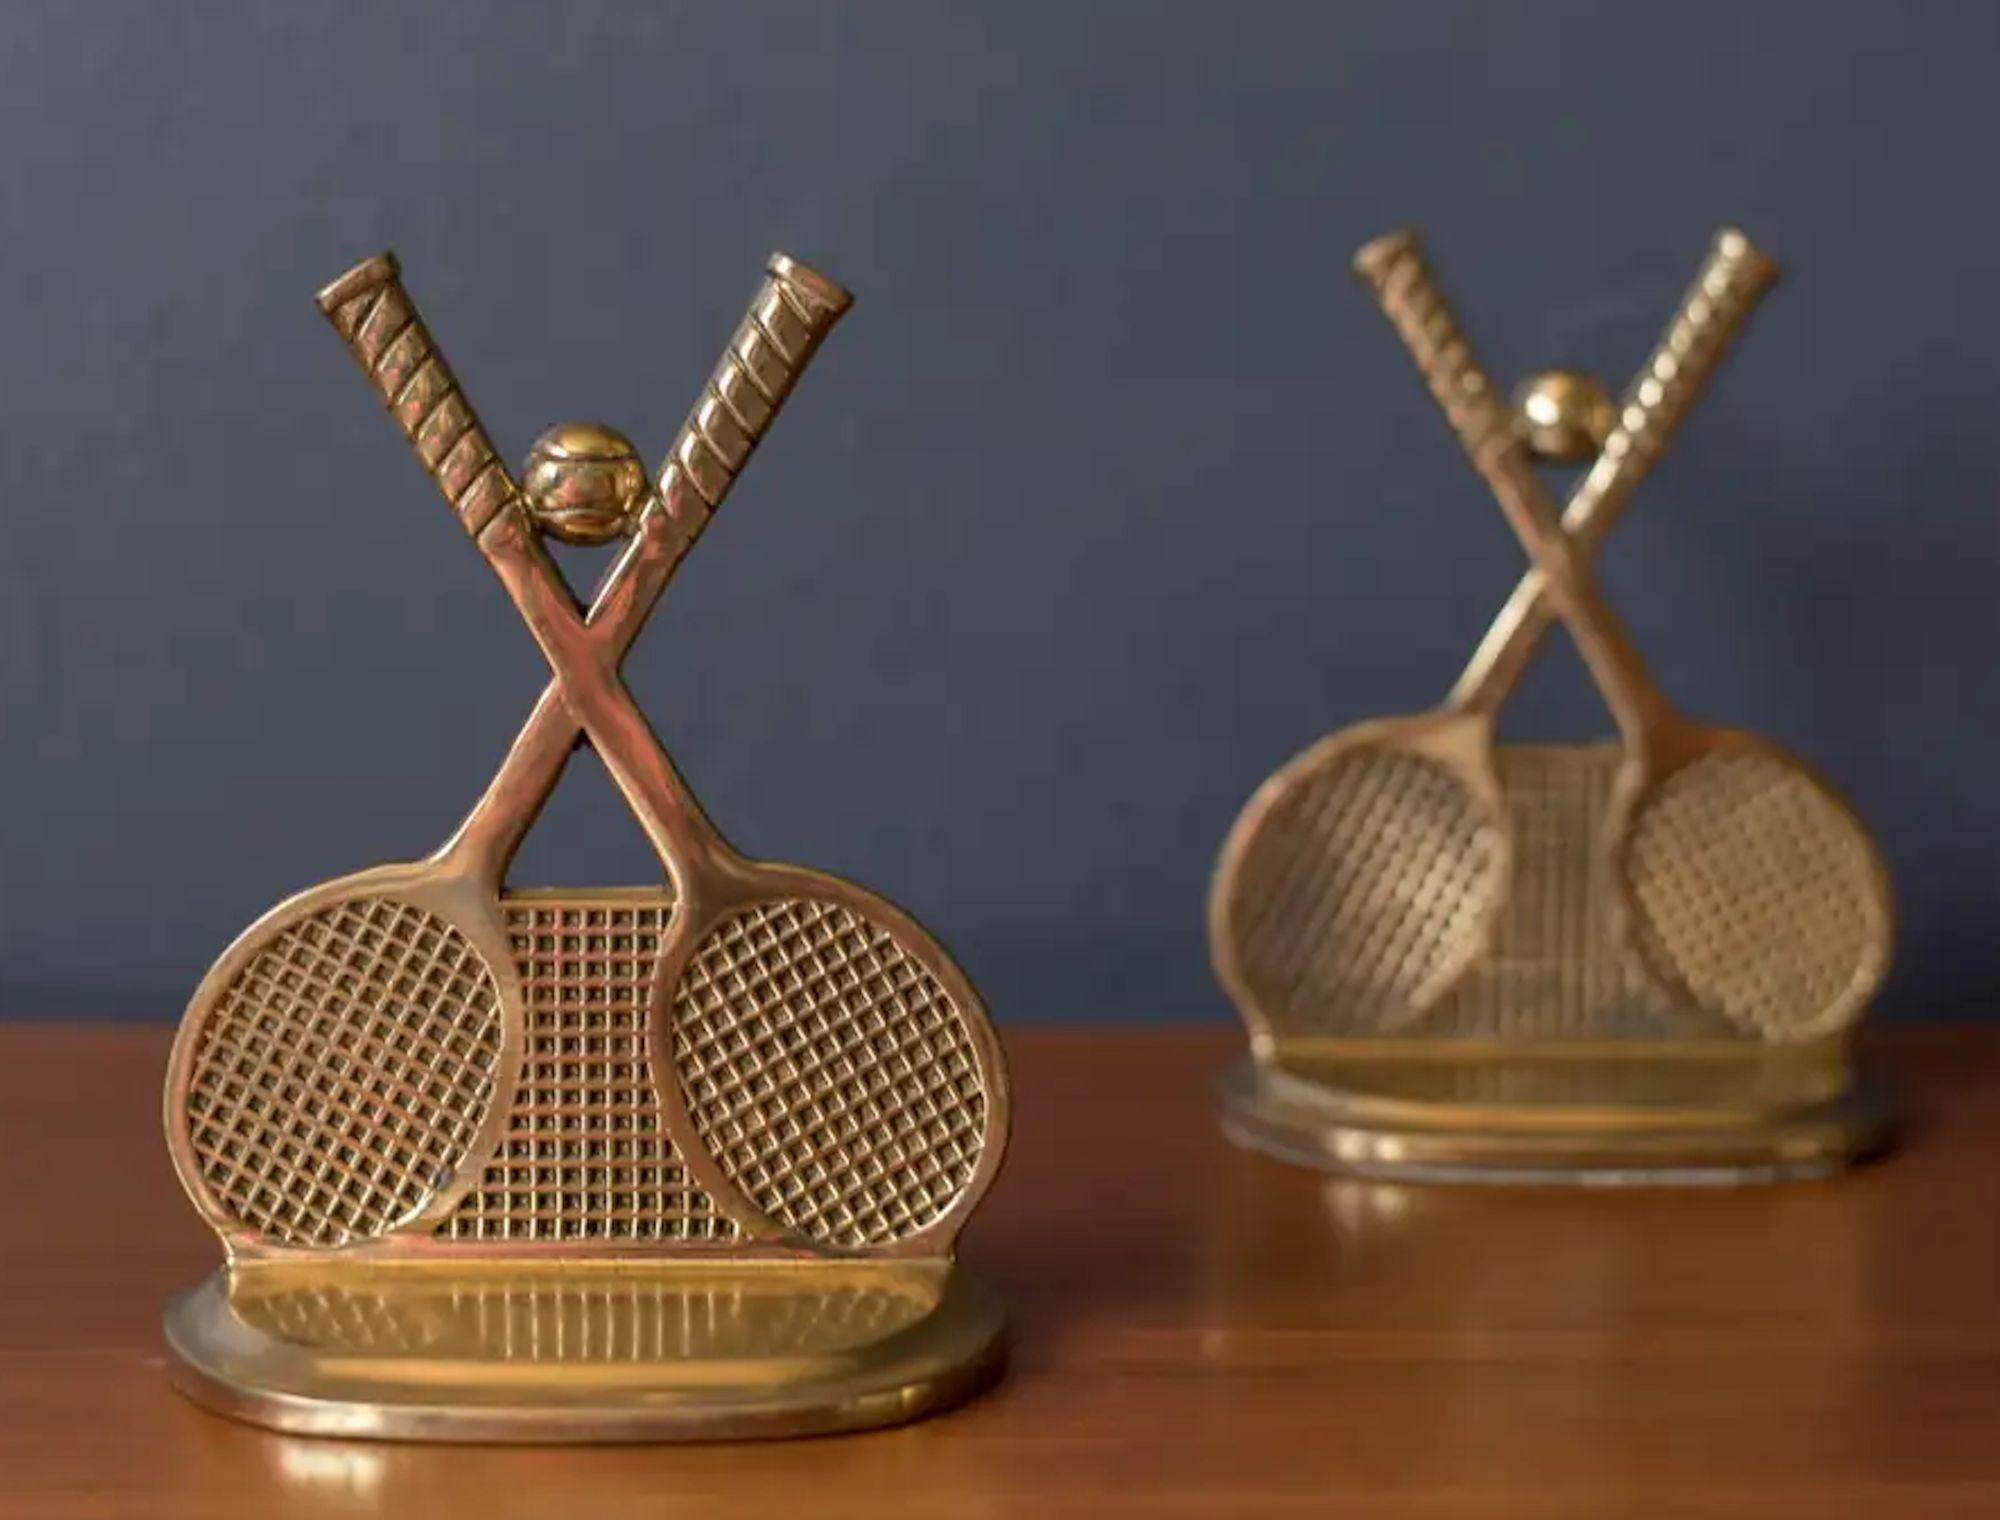 20th Century Pair of Vintage Brass Tennis Racket and Ball Bookends Vintage 1970s Collectible